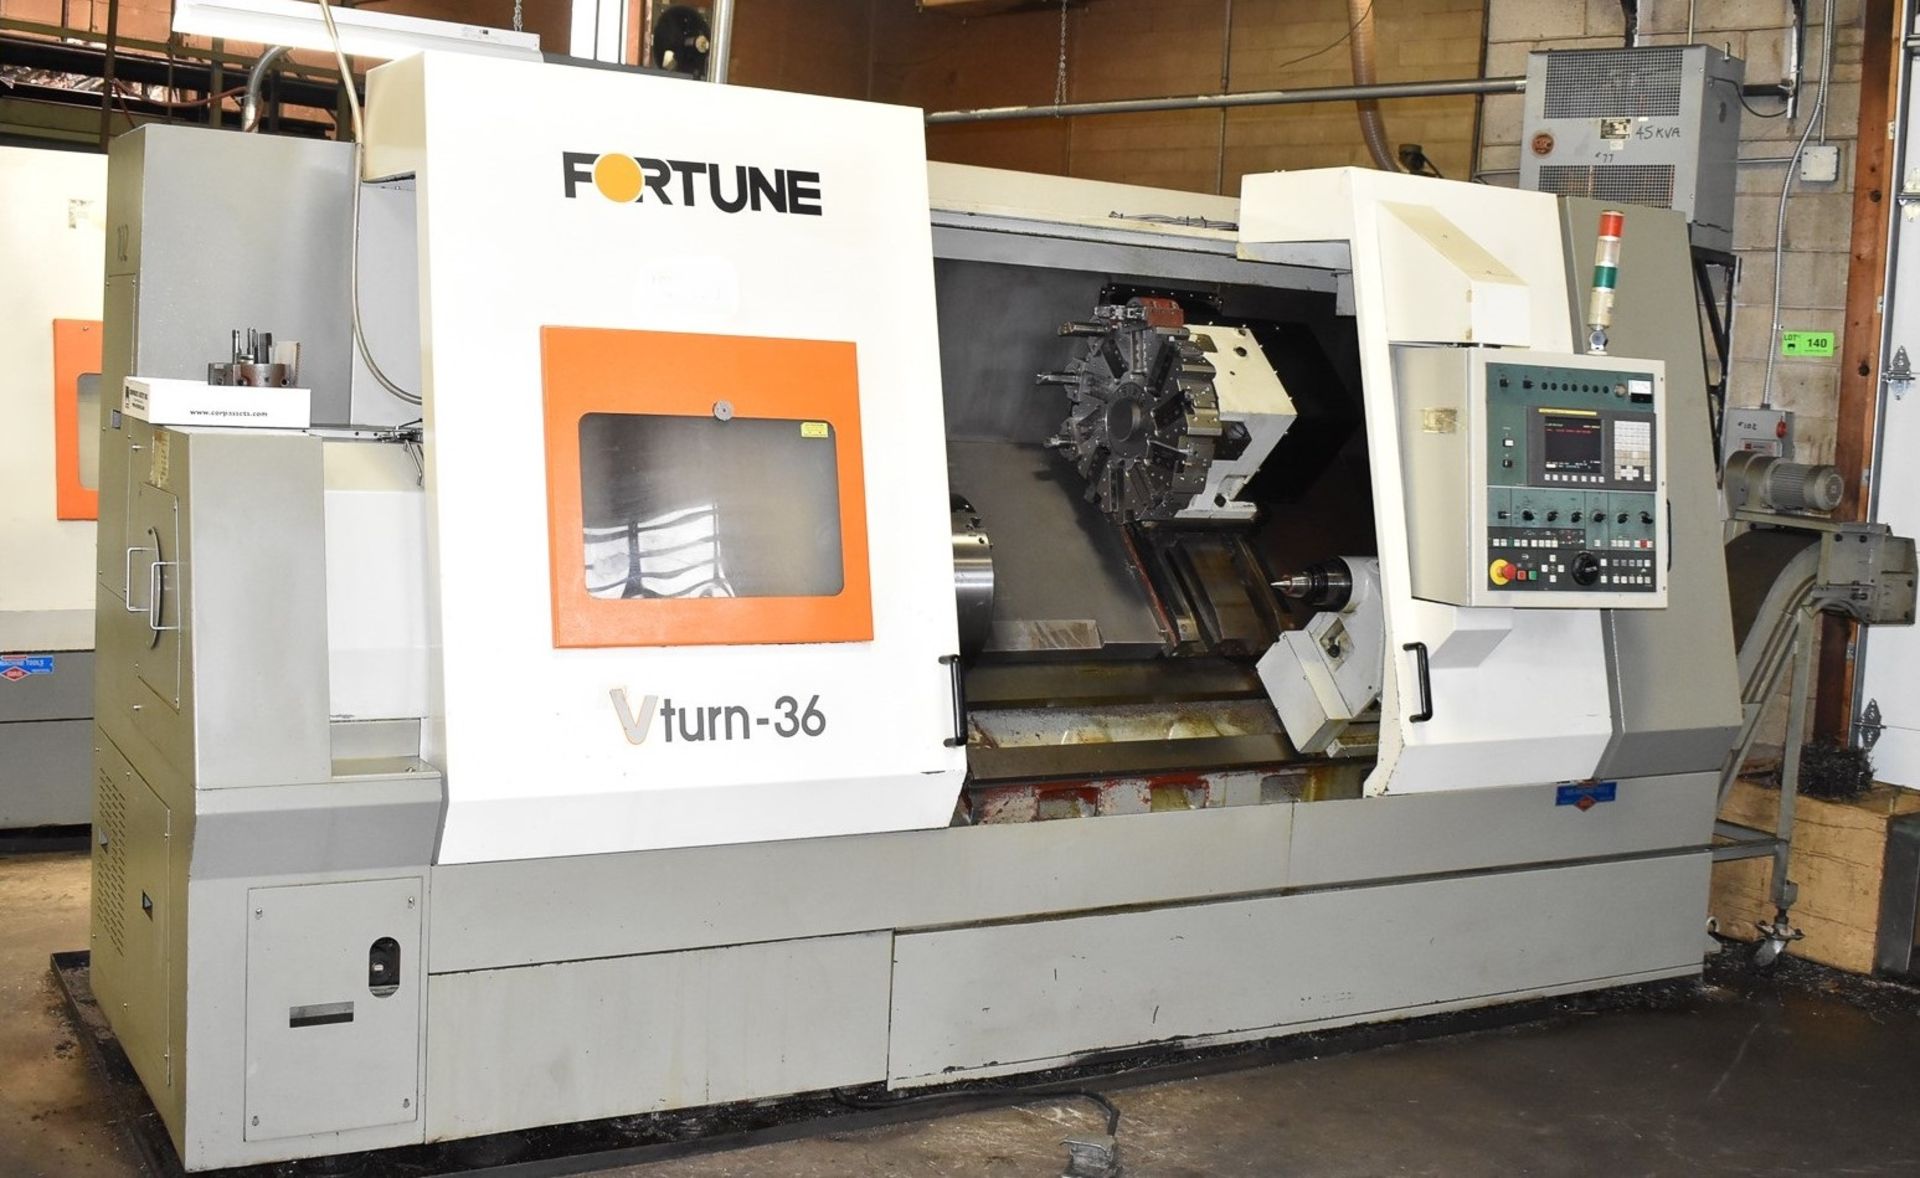 21.65"x35" Victor (Fortune) Mdl Vturn-36 -Axis CNC lathe, S/N ML-1636, New 2007 - Image 2 of 10